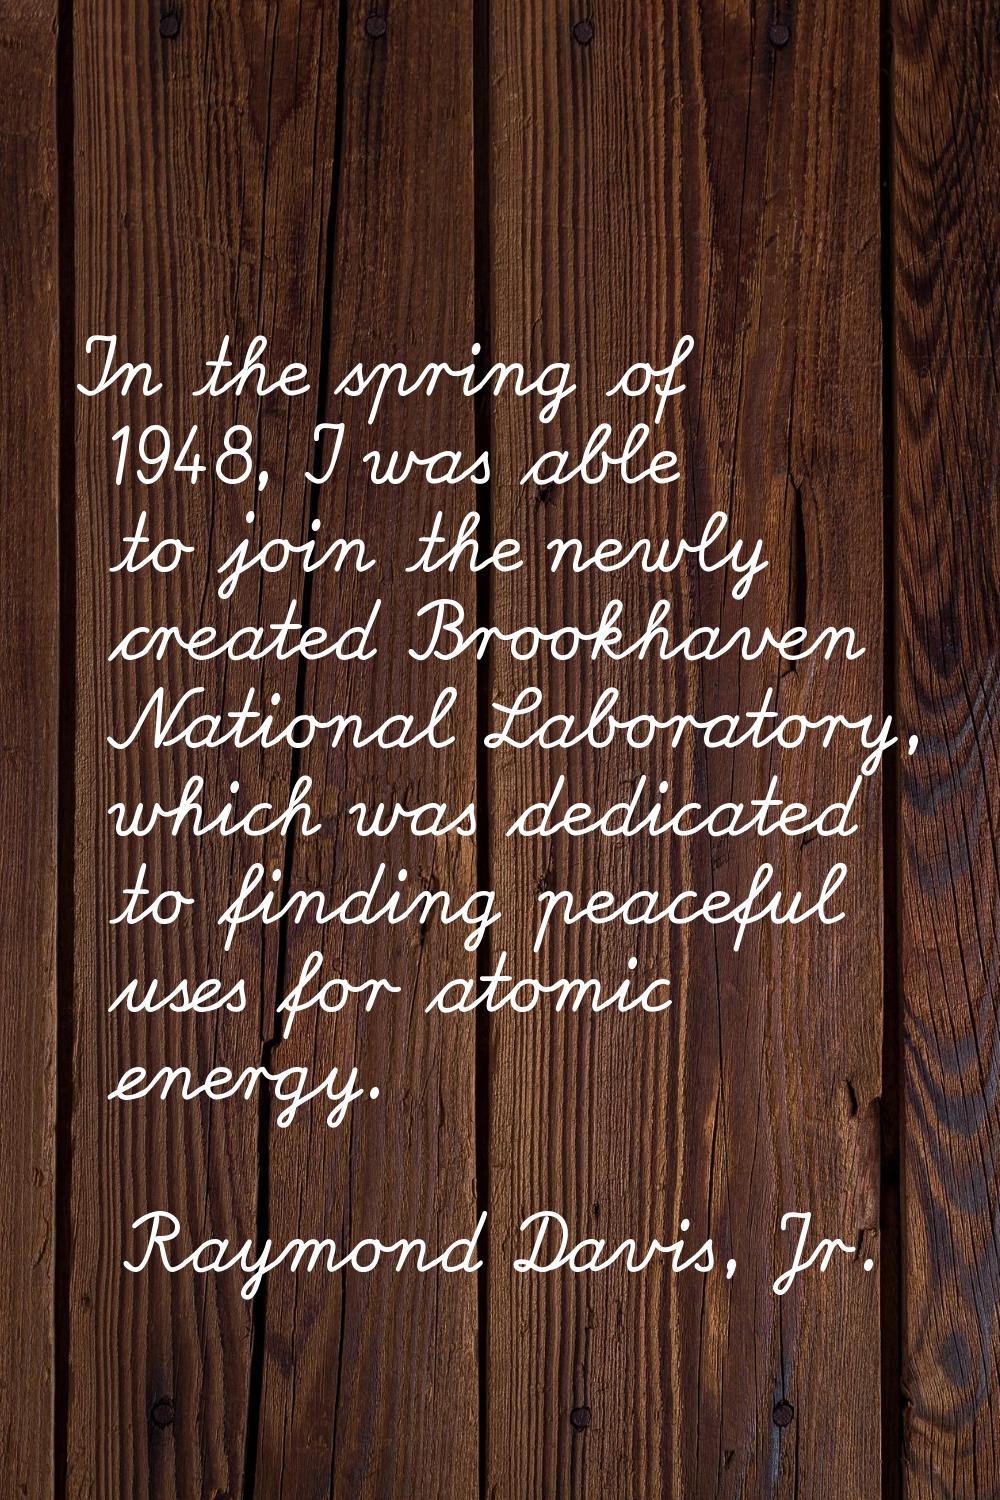 In the spring of 1948, I was able to join the newly created Brookhaven National Laboratory, which w